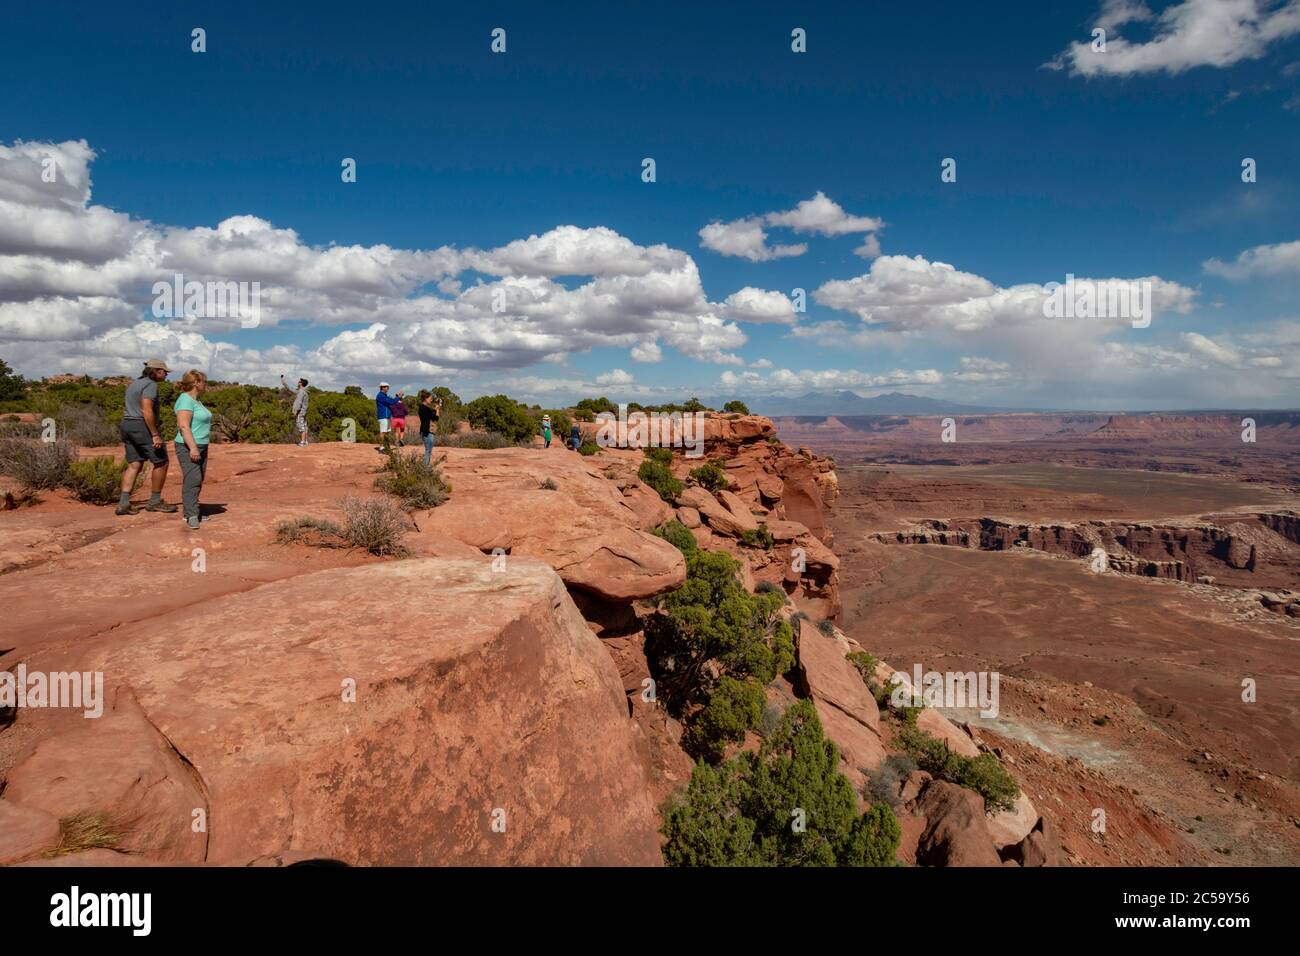 Visitors to Canyonlands National Park in Utah taking photos of the sweeping vistas. Stock Photo